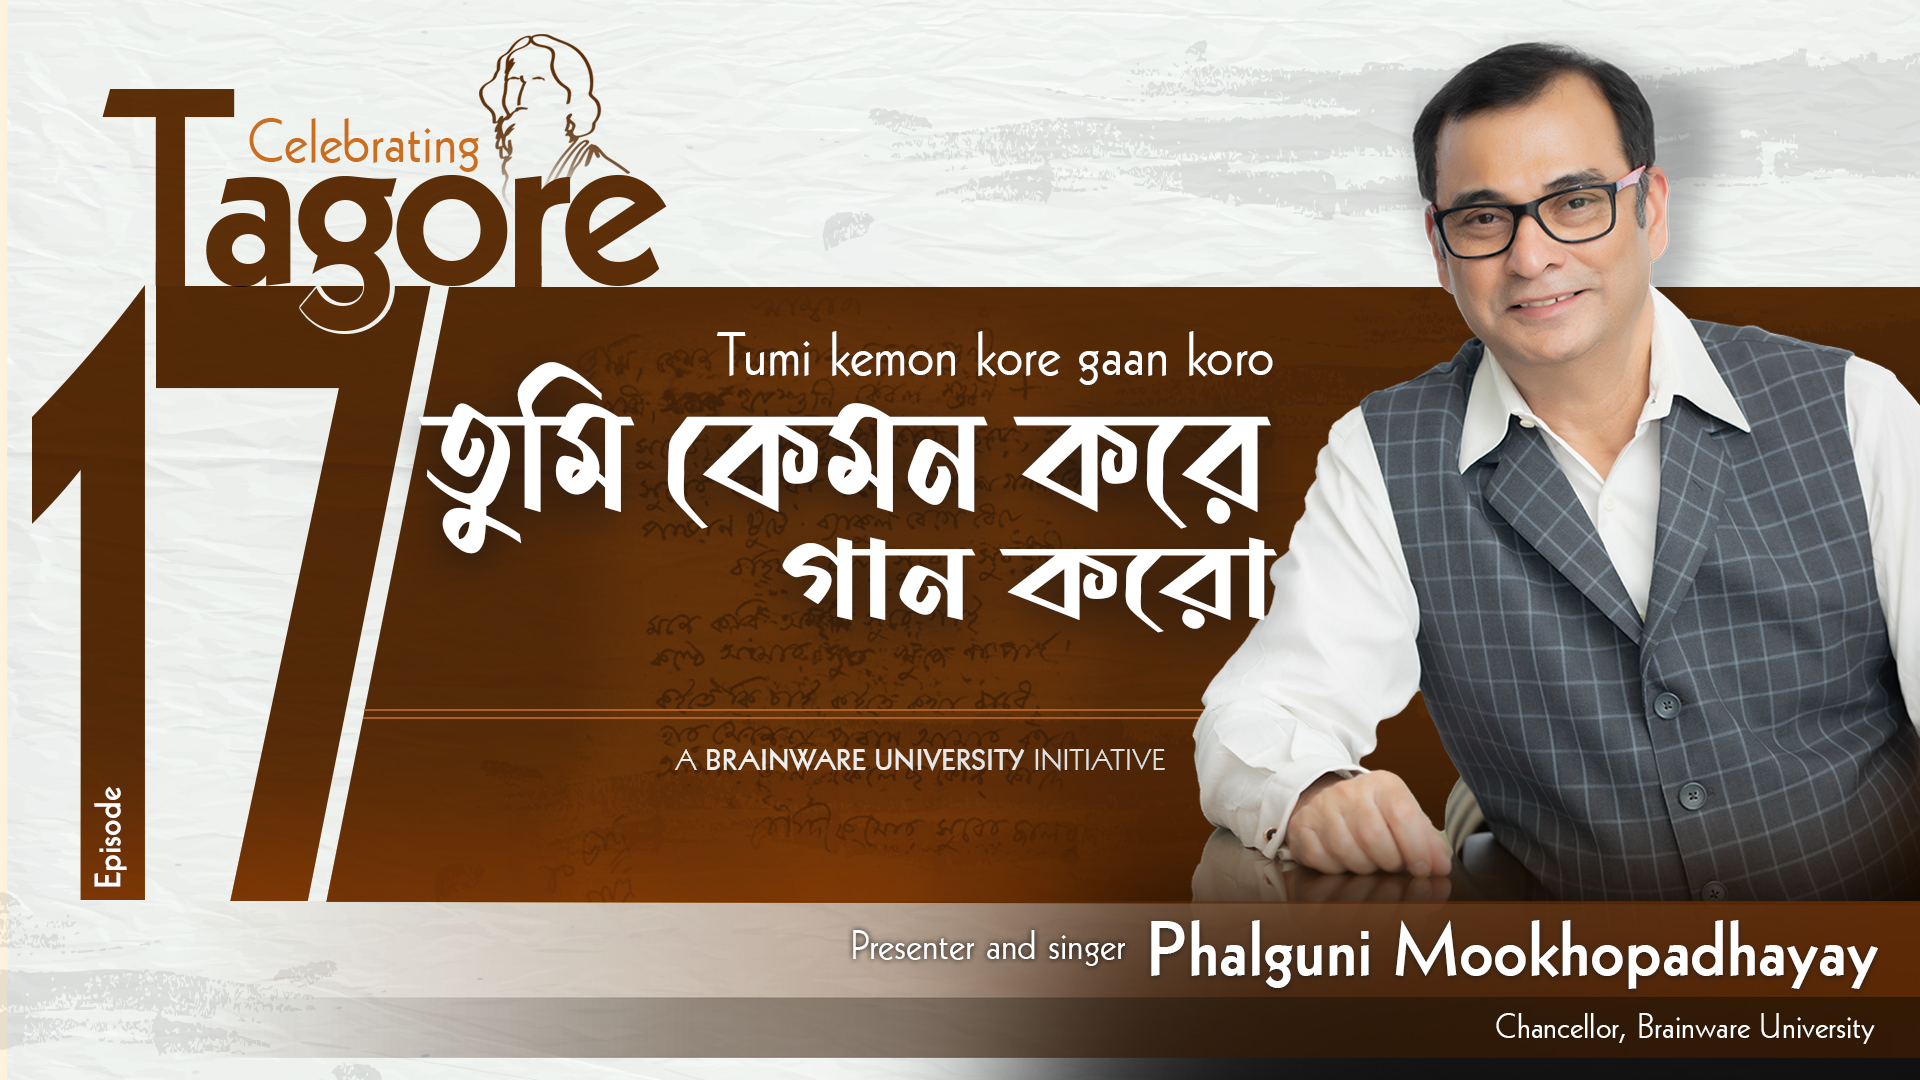 Promotional poster for the 17th episode of "Celebrating Tagore," a Brainware University initiative. The episode is titled "Tumi Kemon Kore Gaan Koro," which features Rabindra Sangeet. Phalguni Mookhopadhayay, the Chancellor of Brainware University, is the presenter and singer for this episode. The poster includes an image of Phalguni Mookhopadhayay and a silhouette of Rabindranath Tagore, highlighting the cultural celebration of Tagore's music.